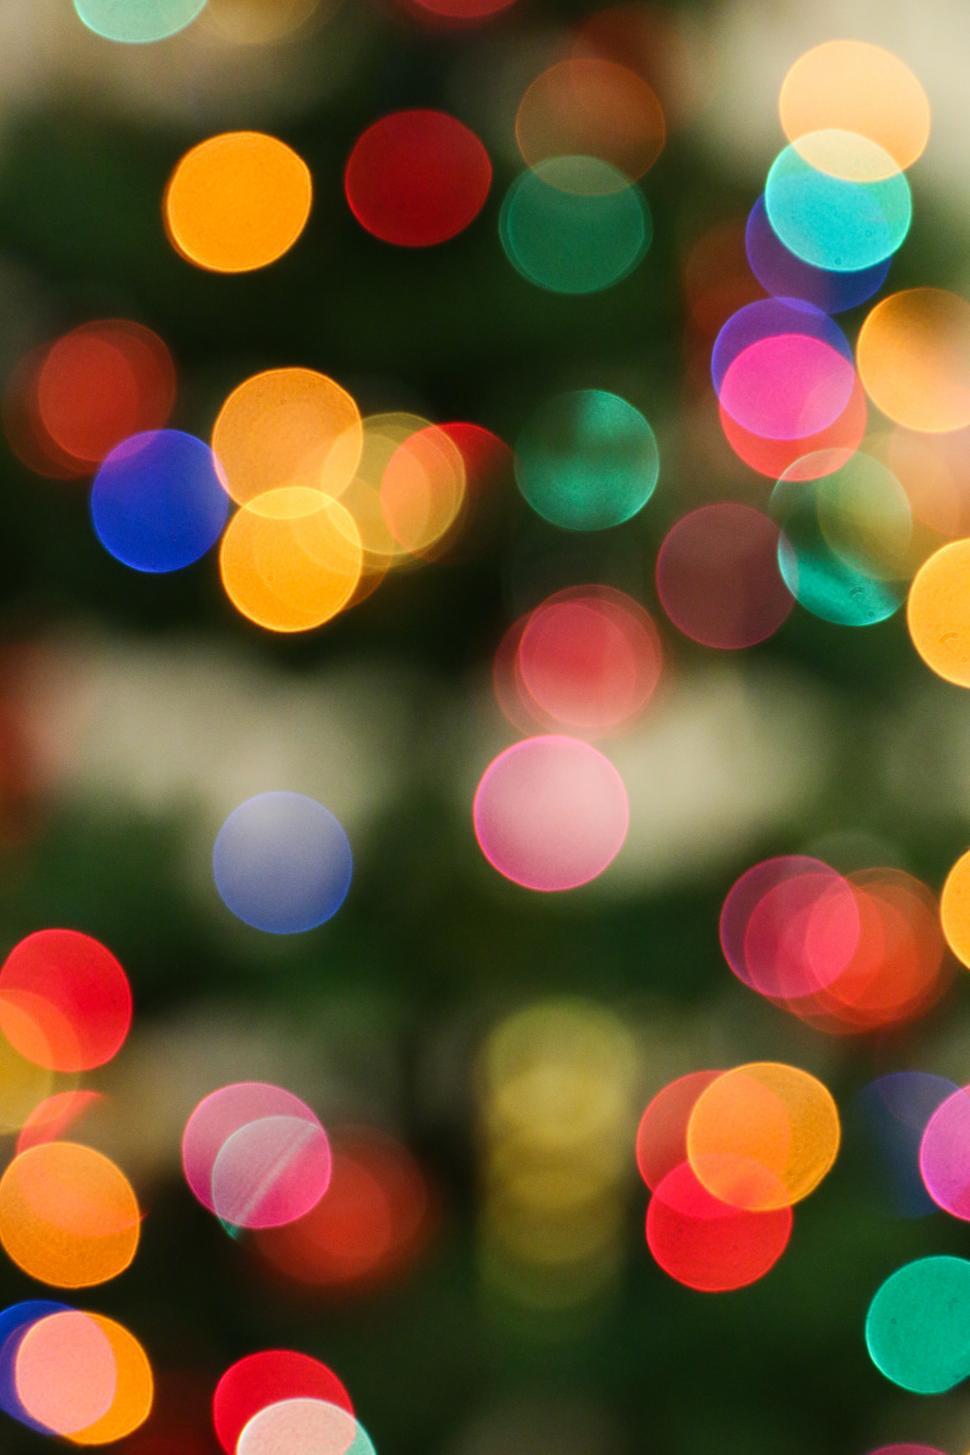 Download Free Stock Photo of Colorful Lights 